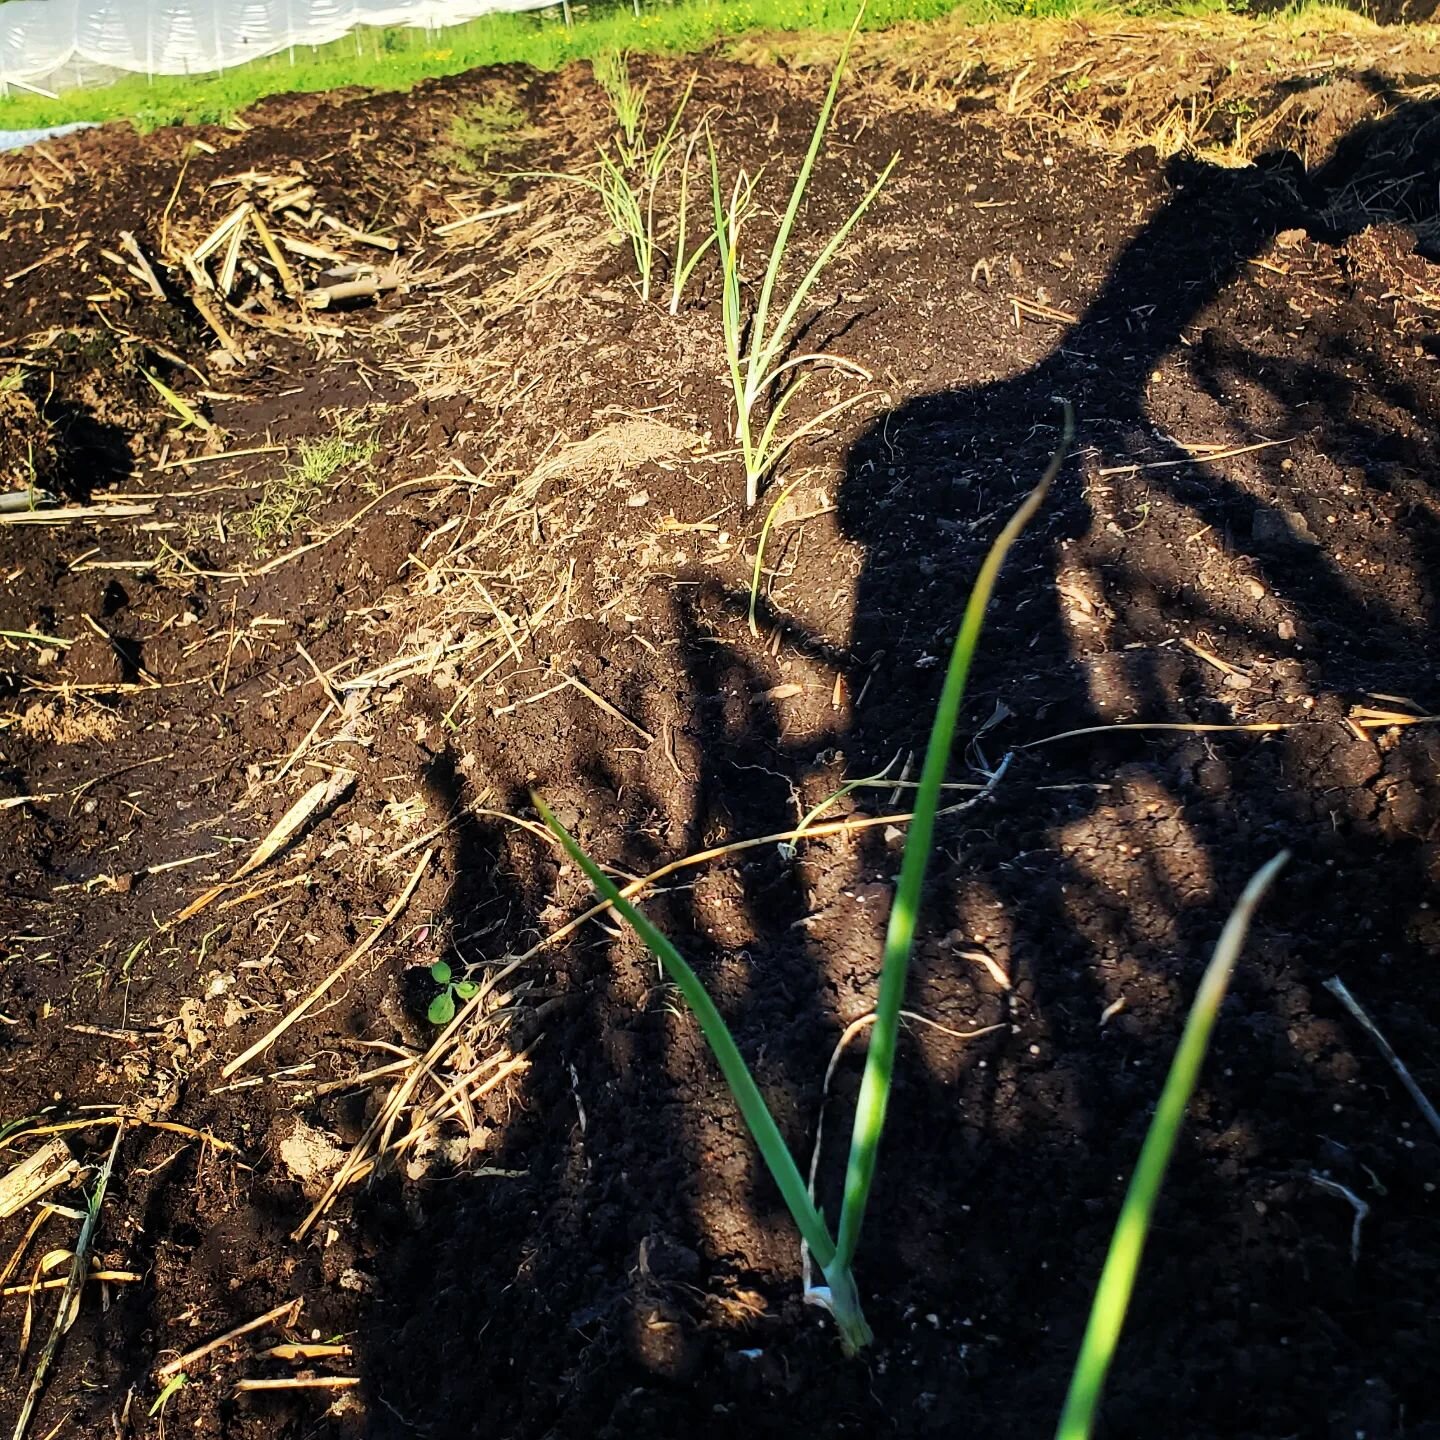 Round 1 of shallots (the overachievers) are in the ground!